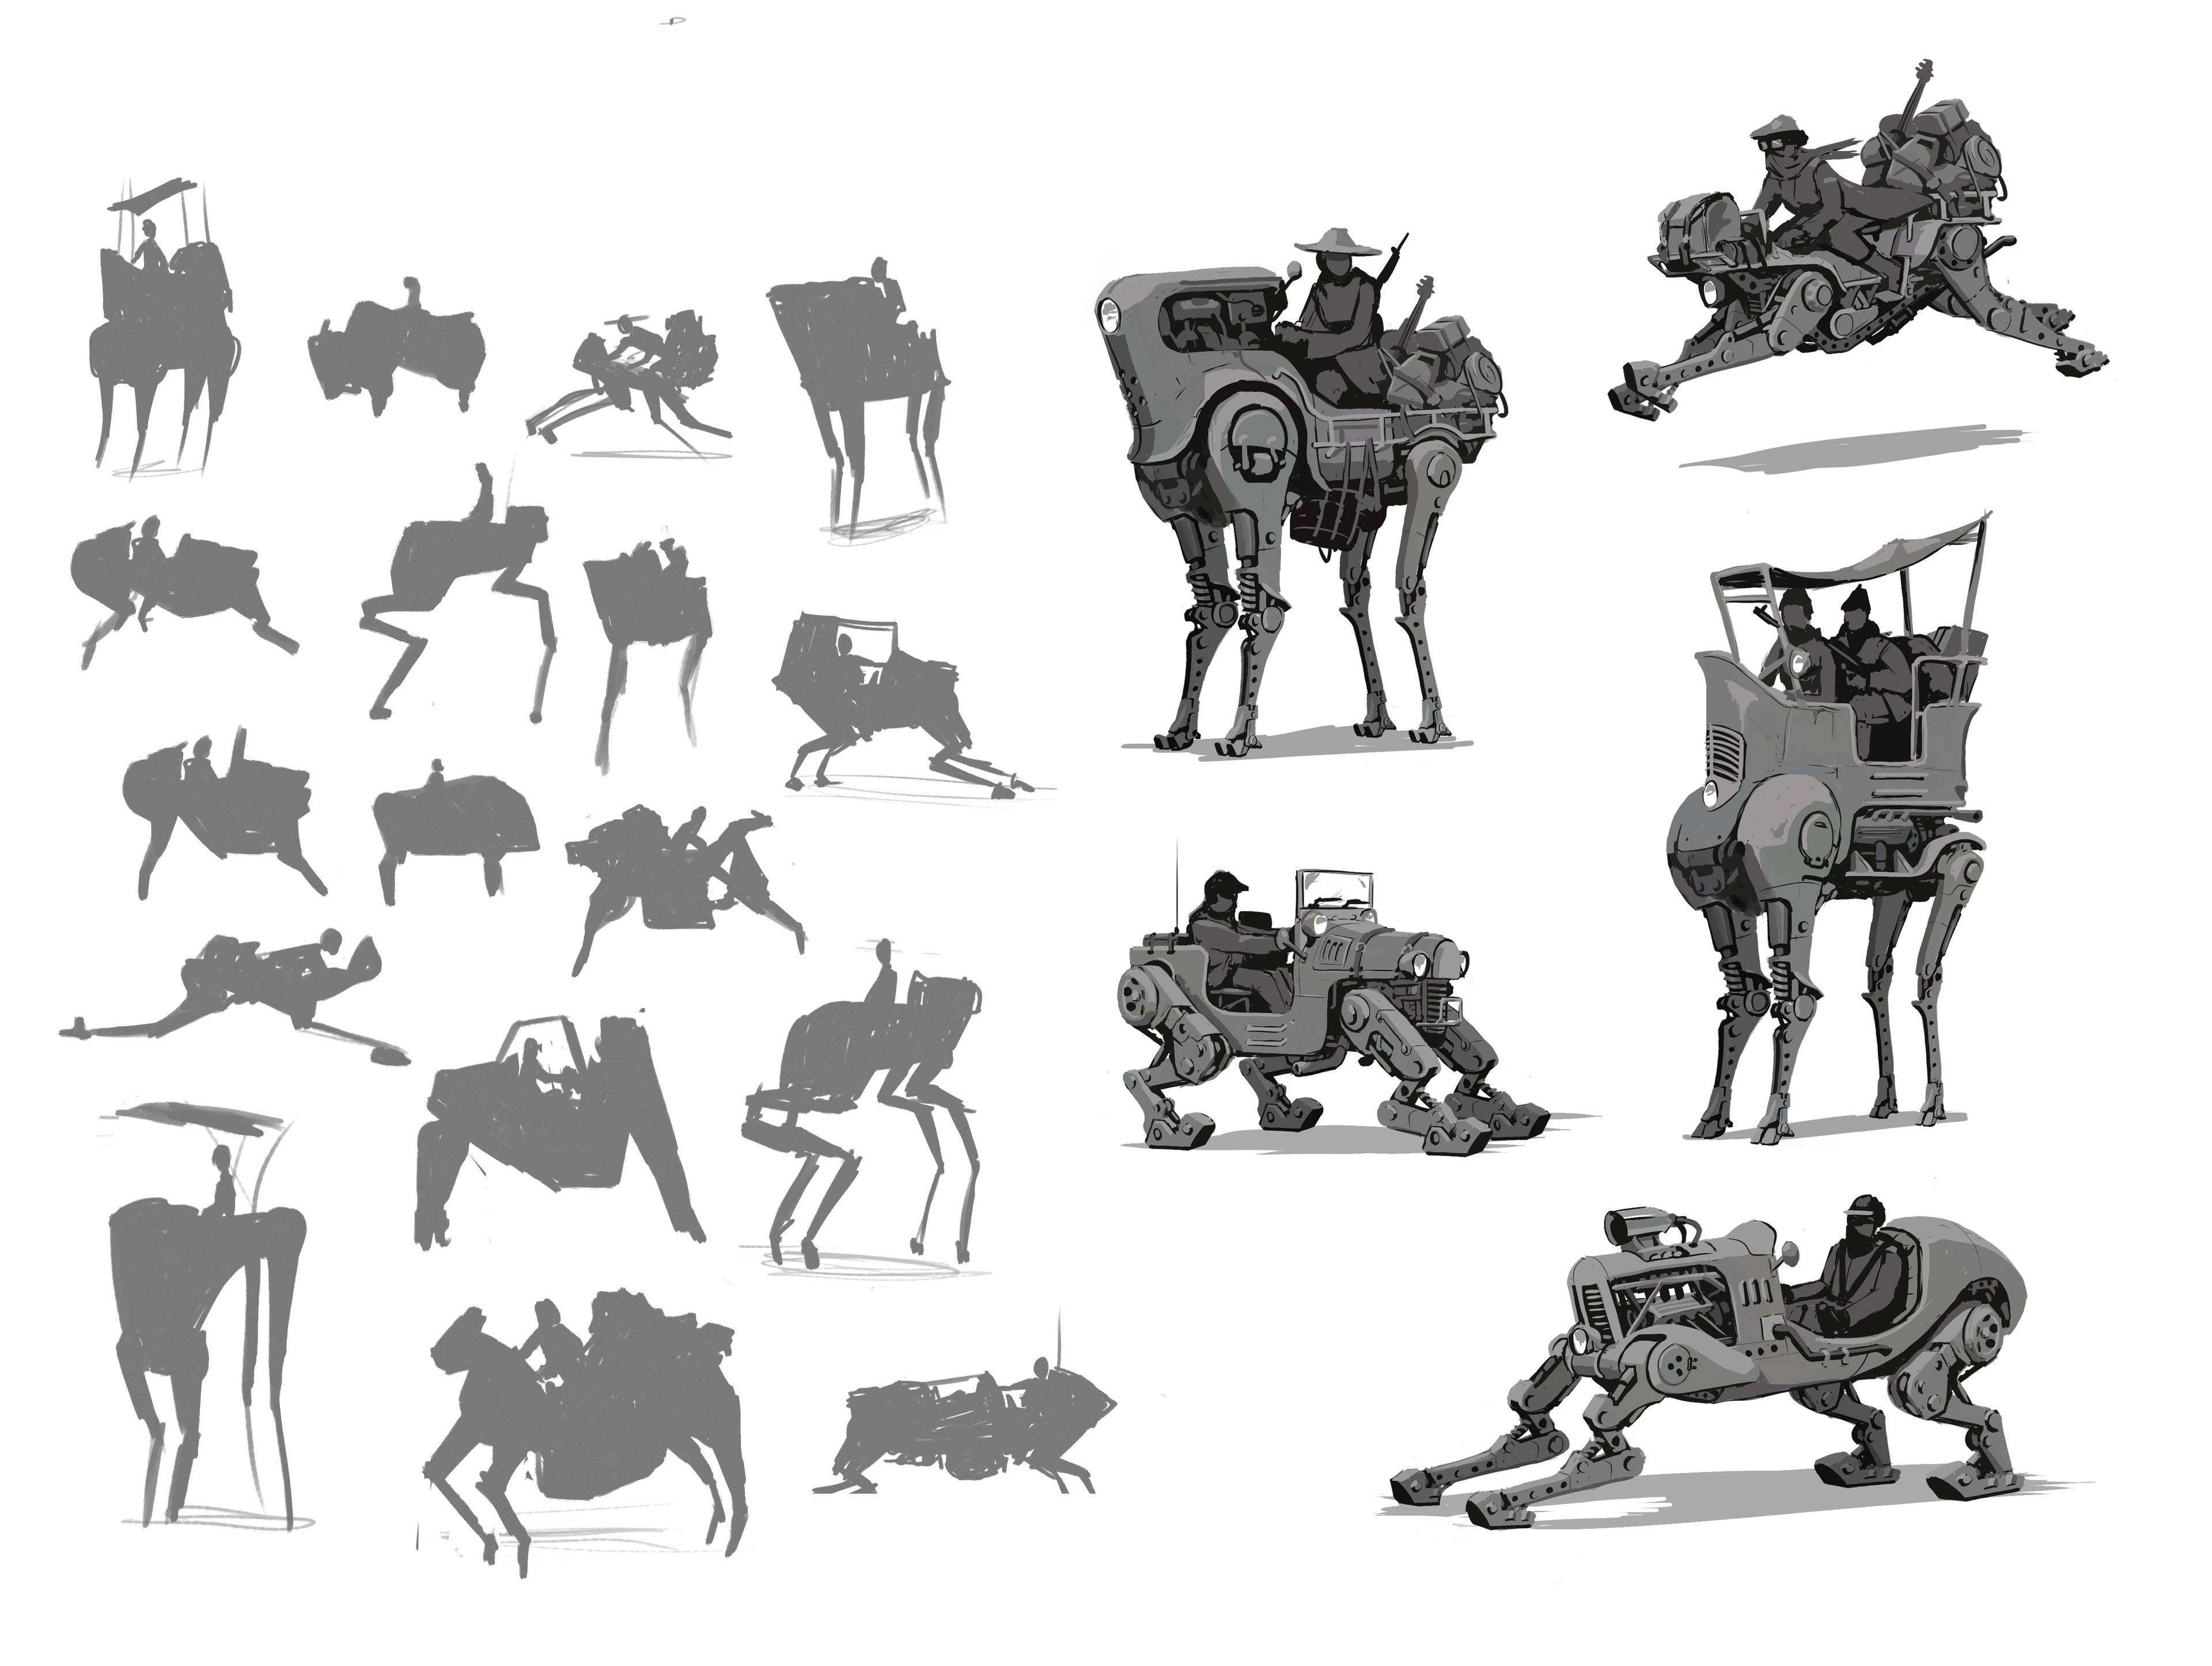 Exploring dieselpunk quadruped mechs, from silhouettes to more refined thumbnails.